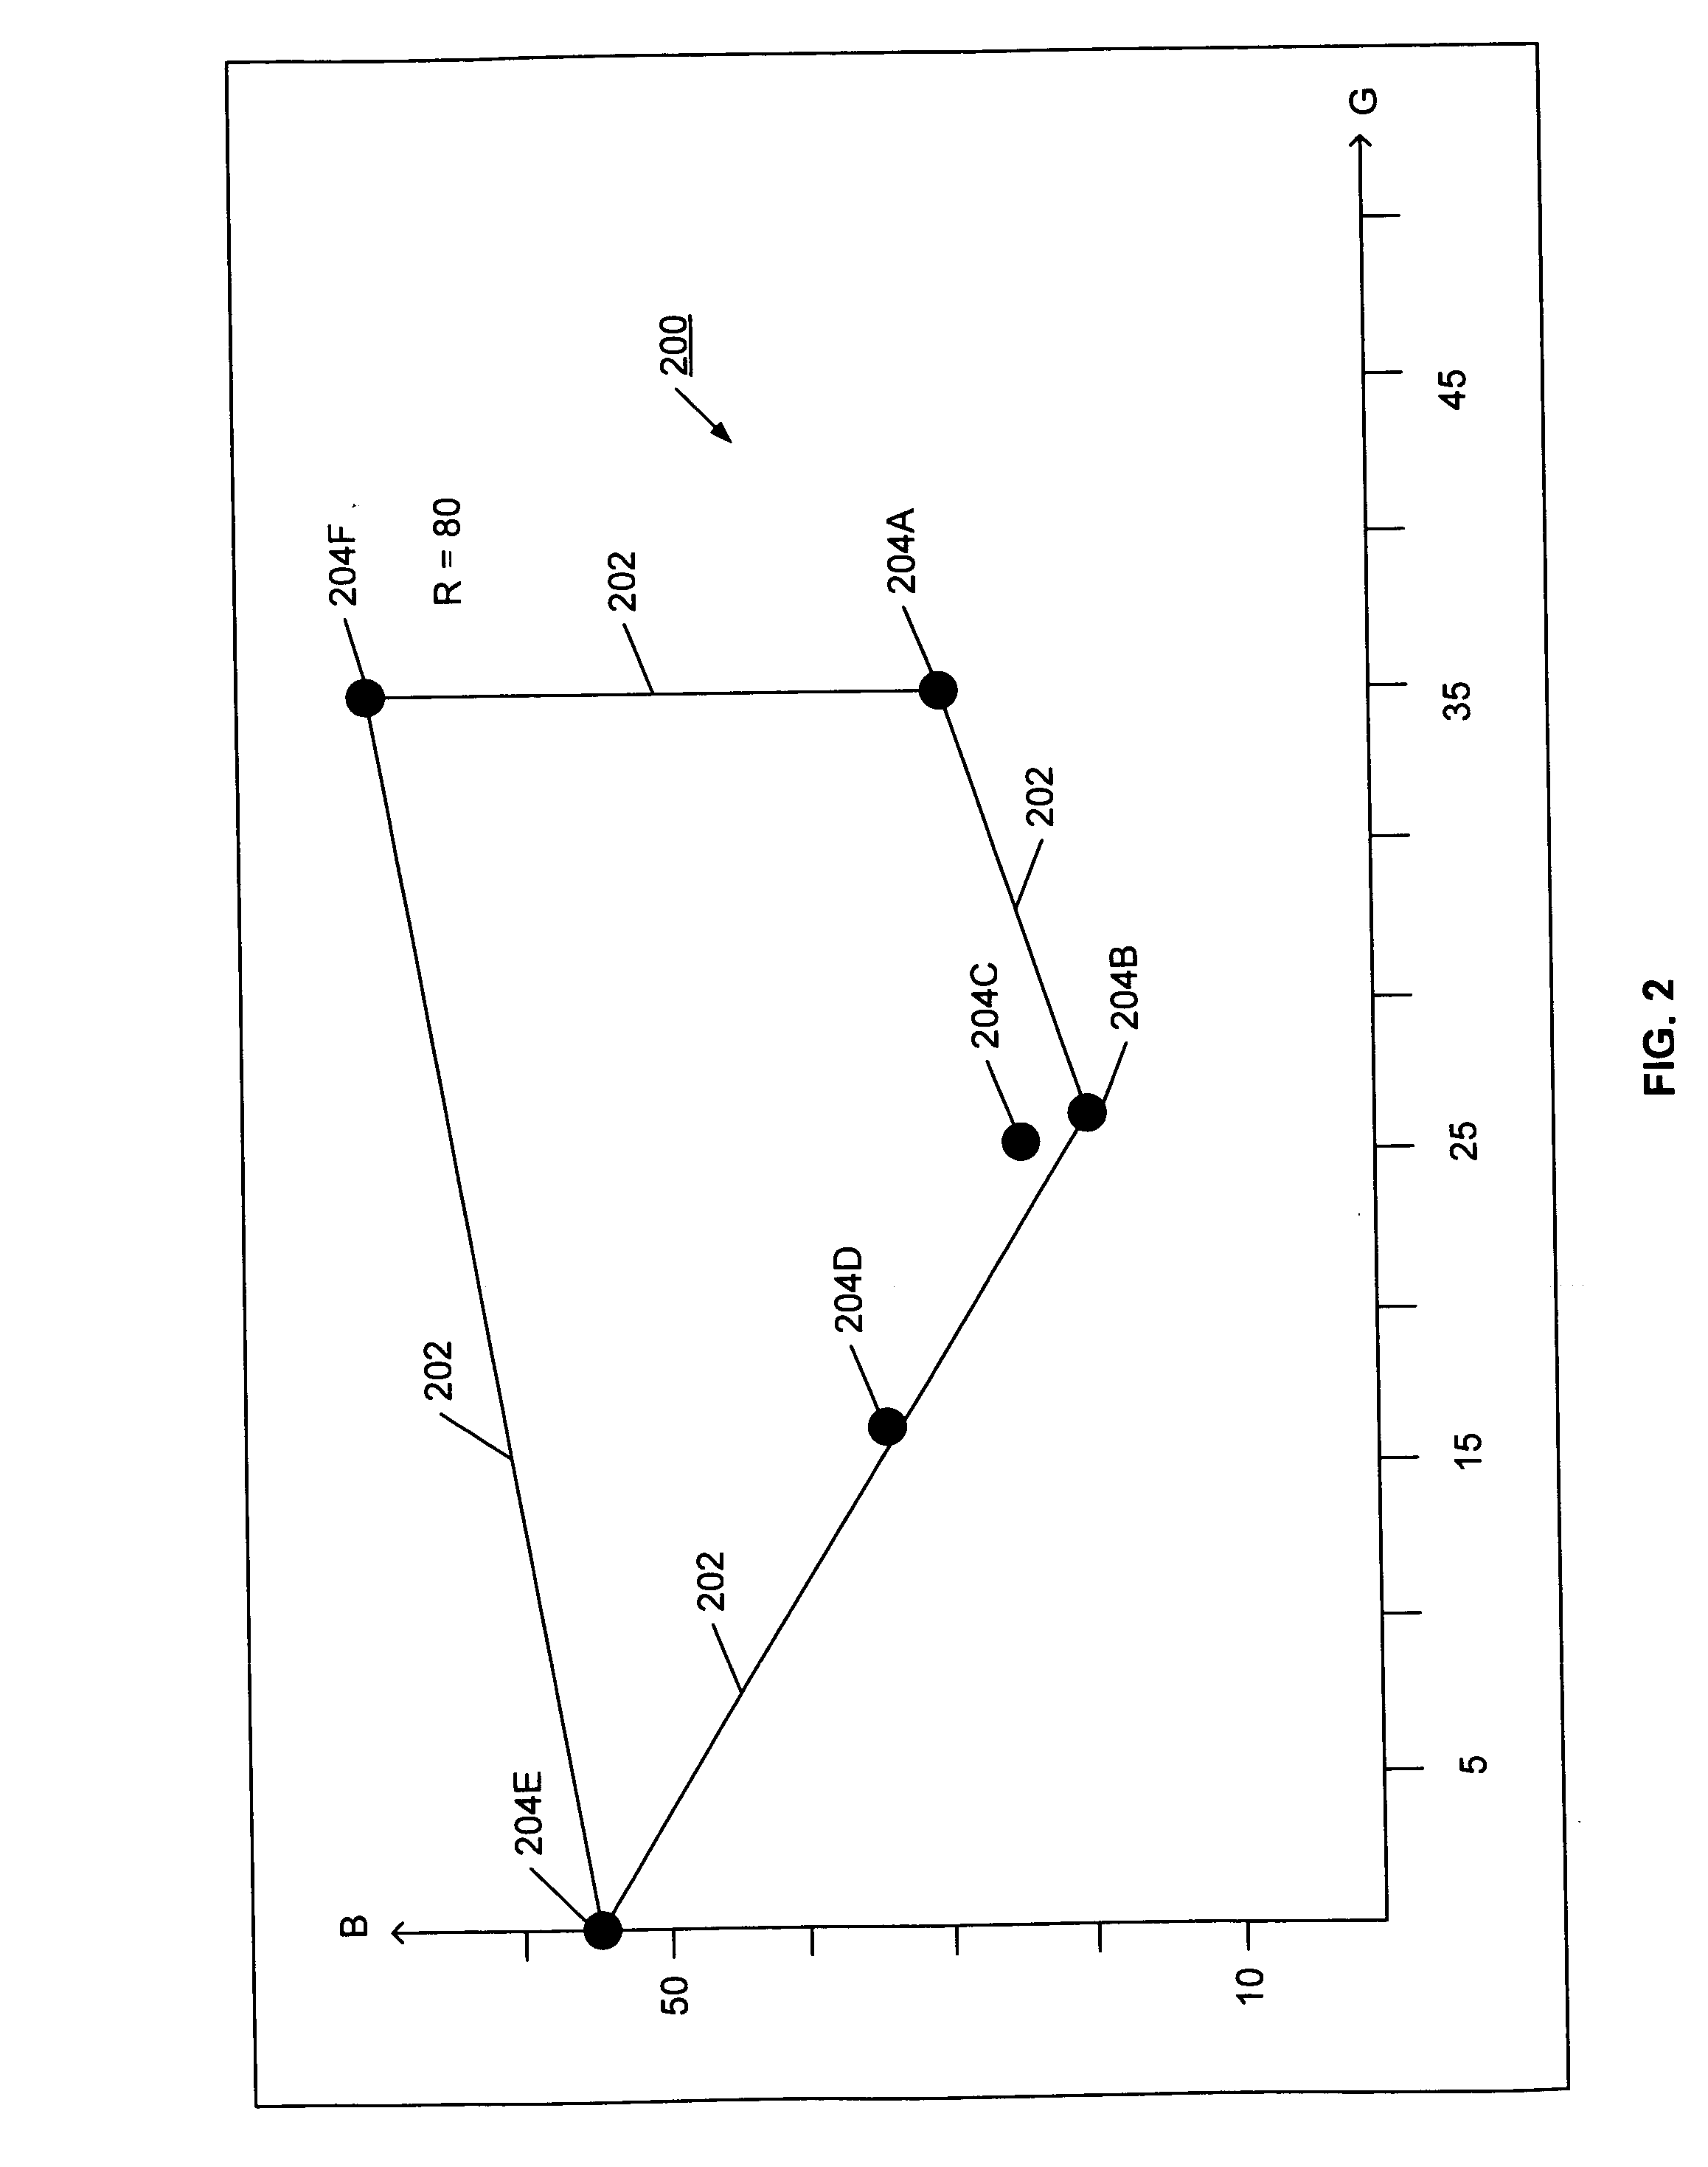 Red eye reduction apparatus and method